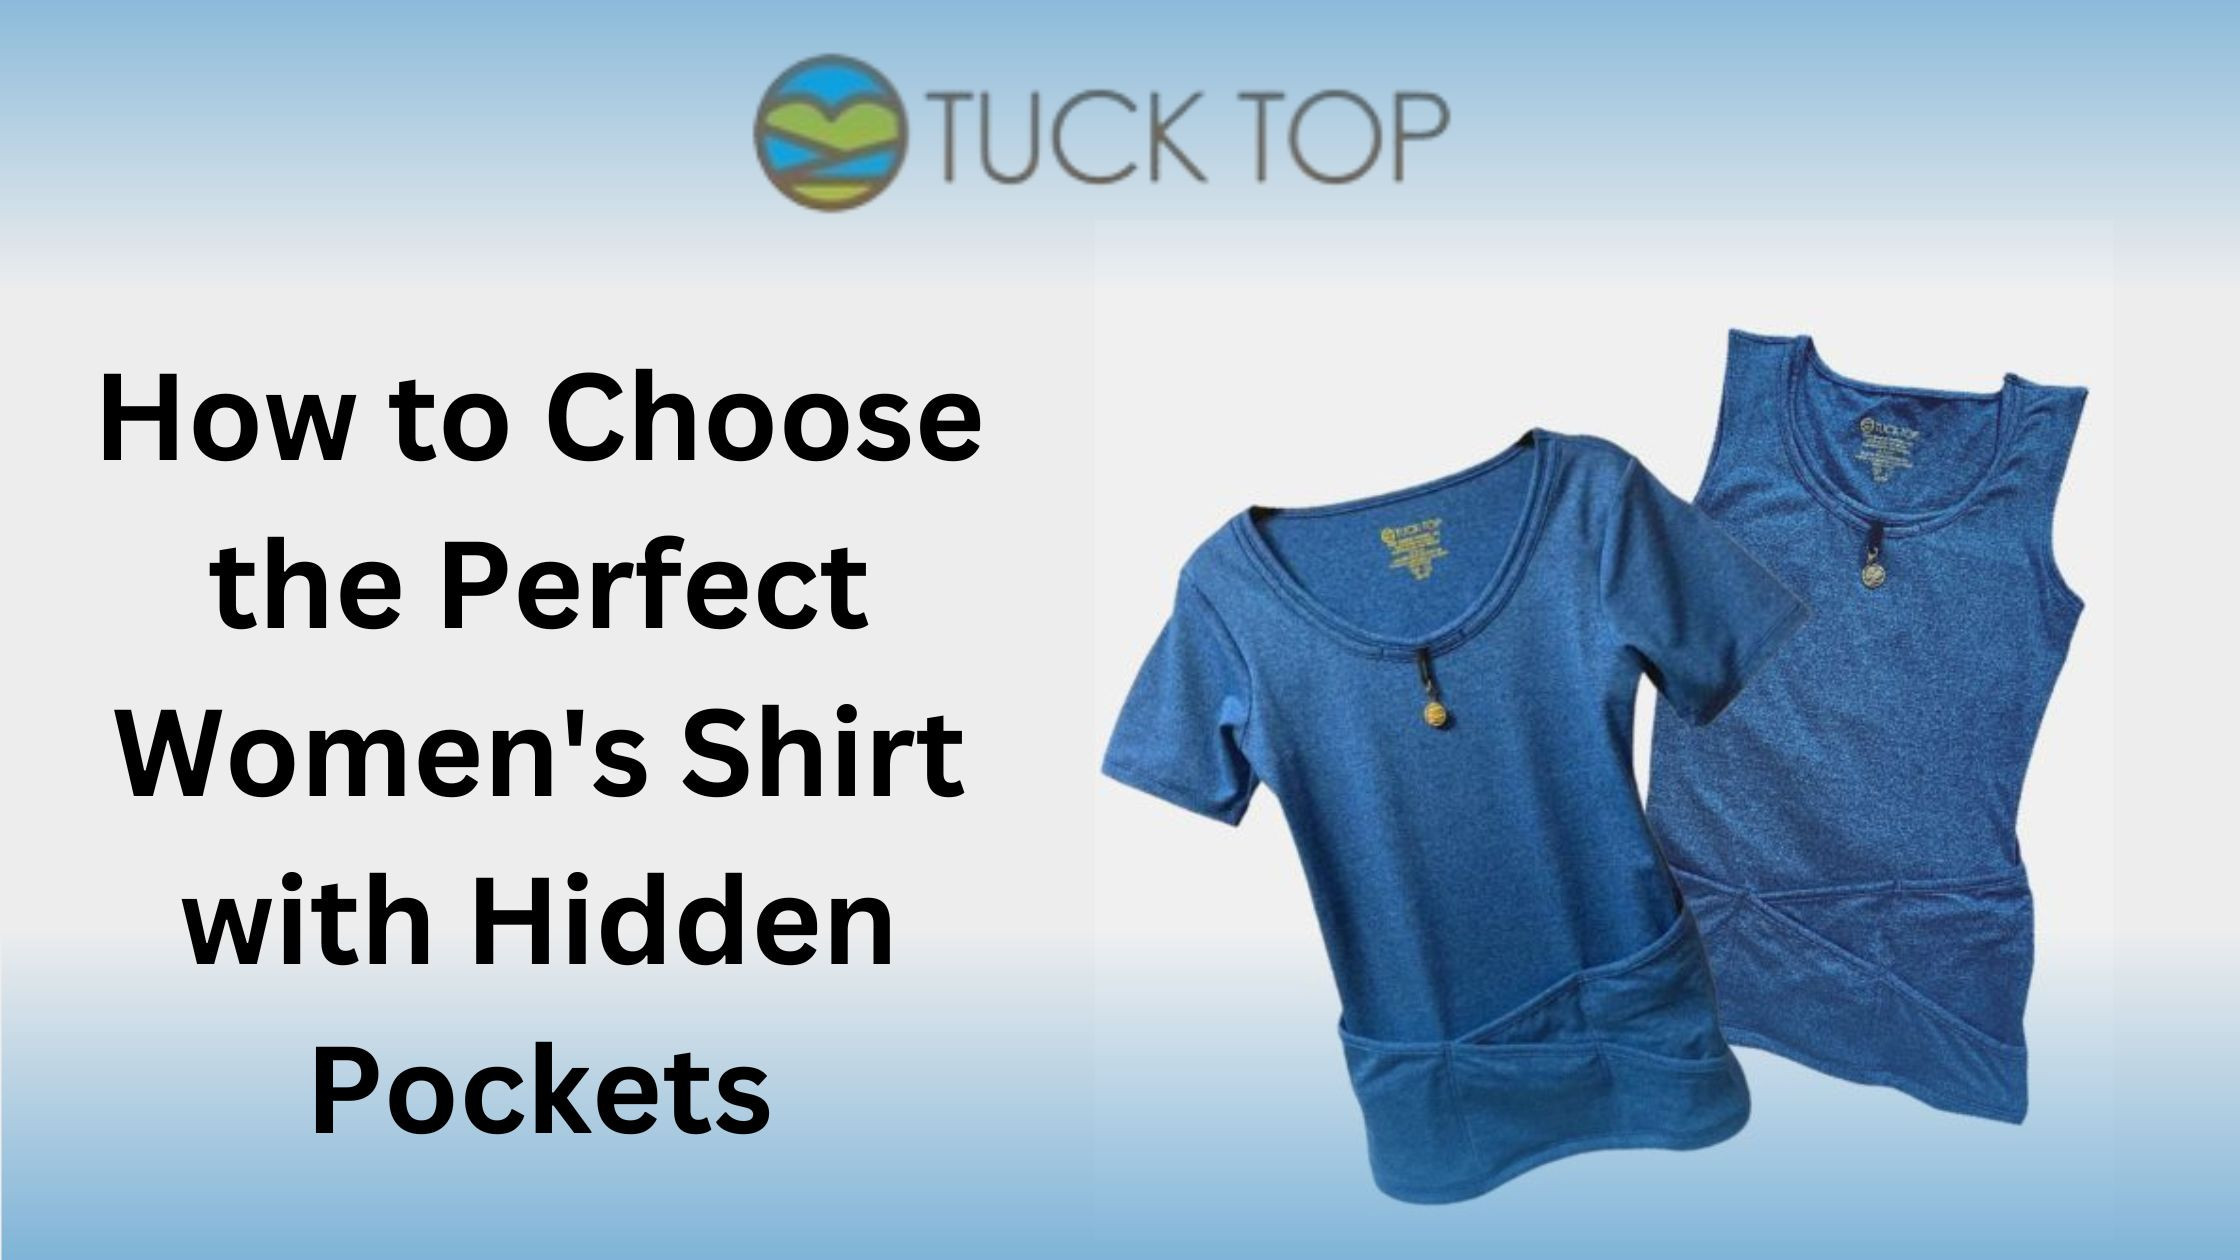 How To Choose The Perfect Women's Shirt With Hidden Pockets blog by Tuck top